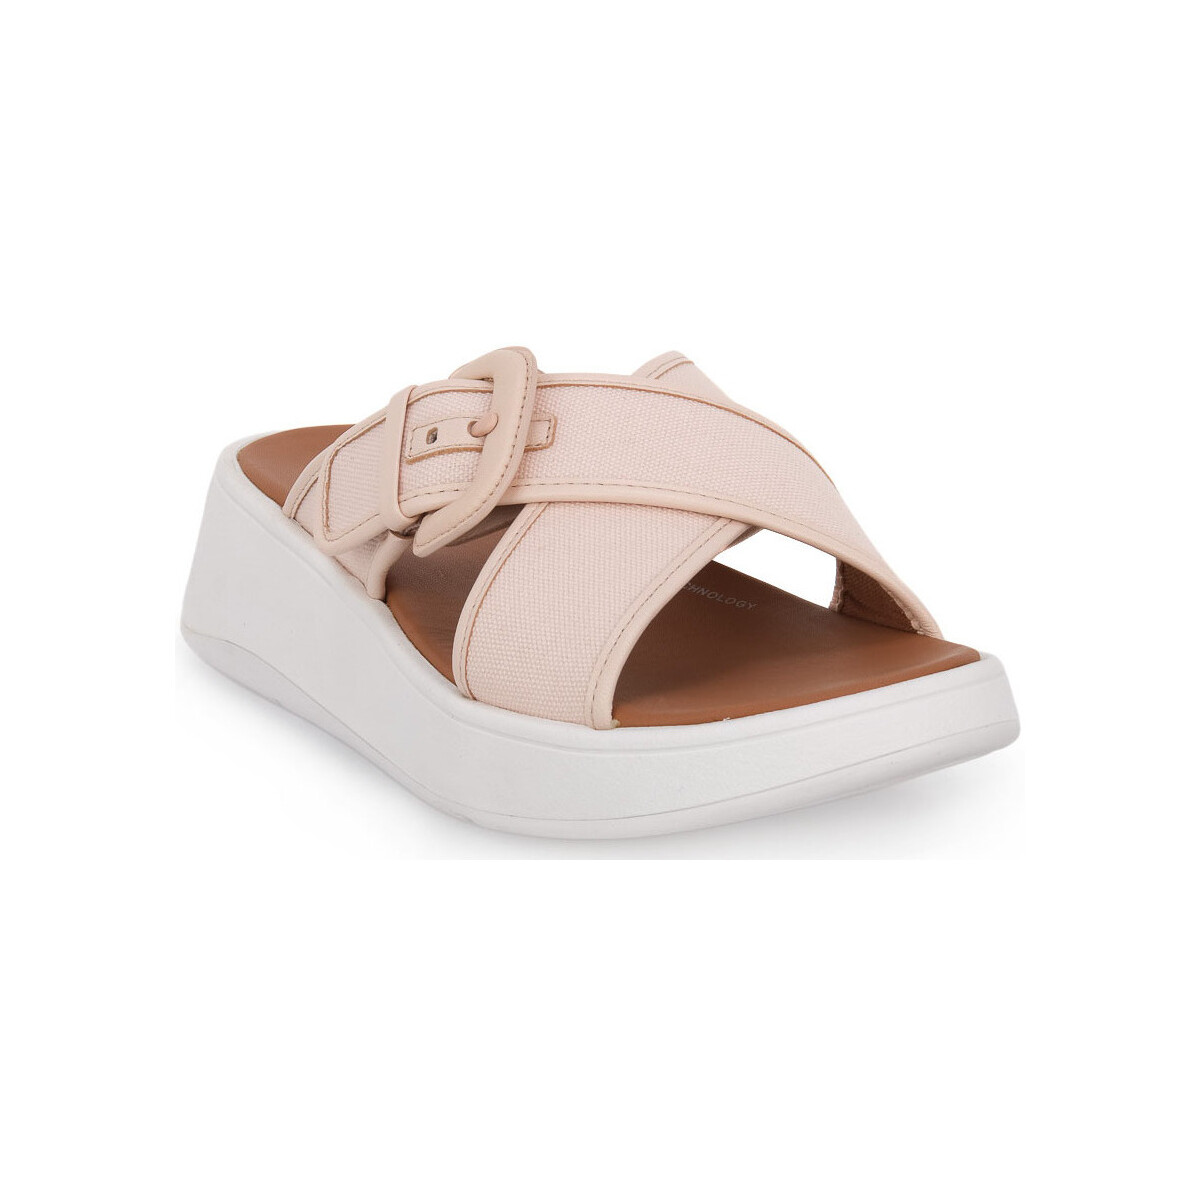 Zapatos Mujer Zuecos (Mules) FitFlop F MODE BUCKLE CANVAS PLATFORM Rosa